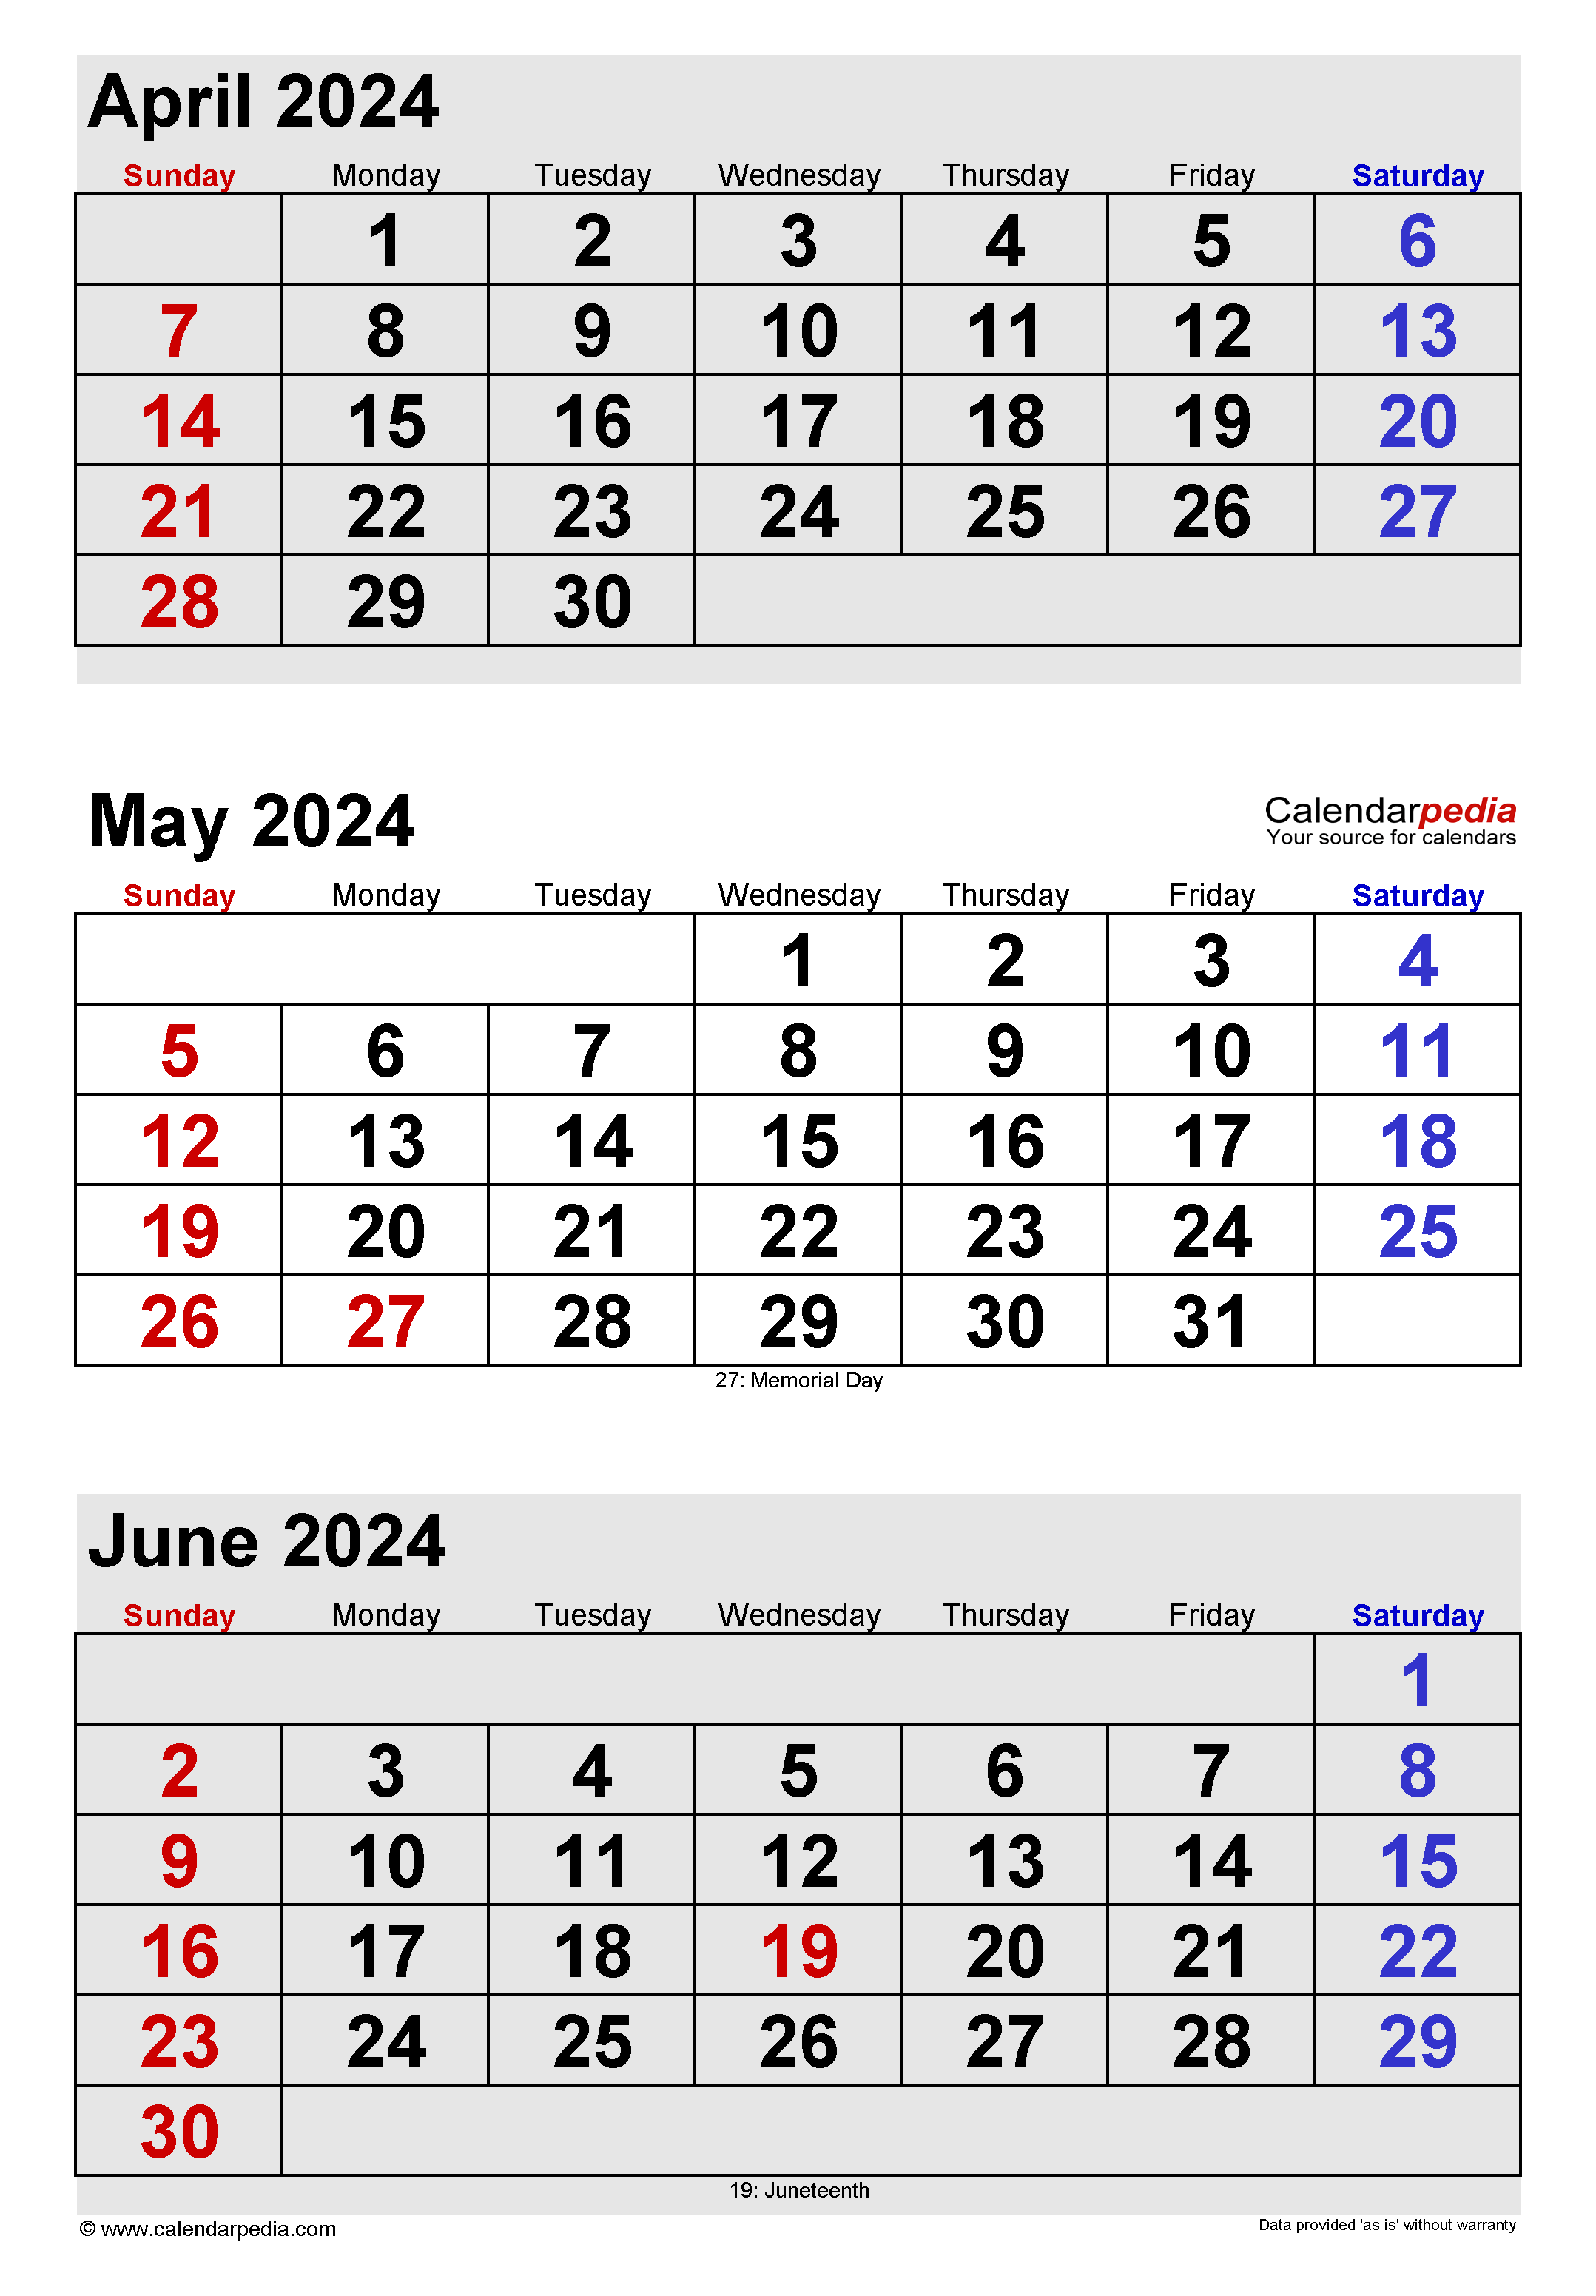 May 2024 Calendar | Templates For Word, Excel And Pdf with regard to April/May 2024 Calendar